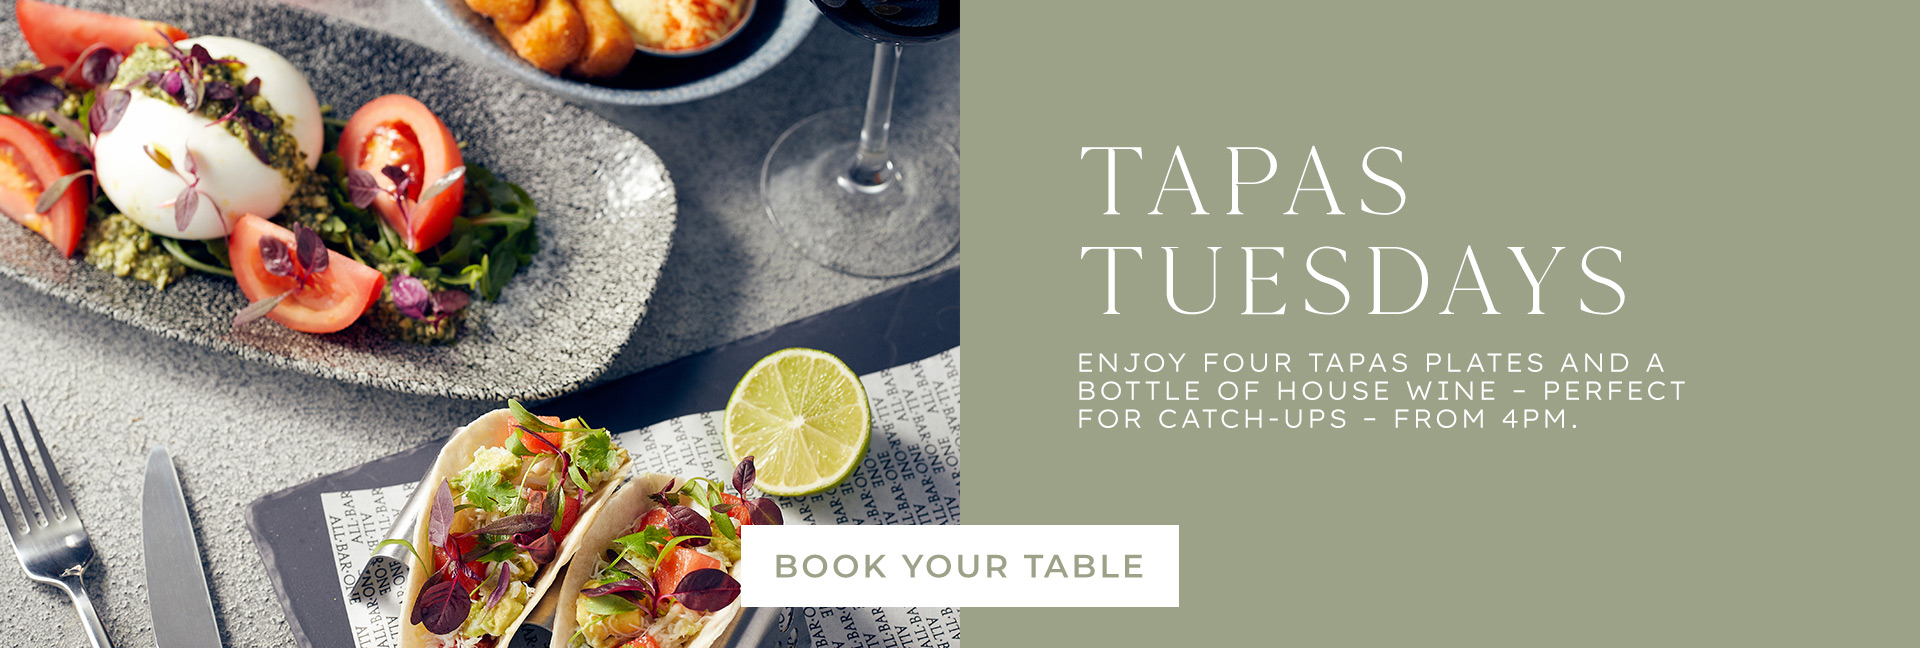 Tapas Tuesday at All Bar One Bham T2 Airside - Book now